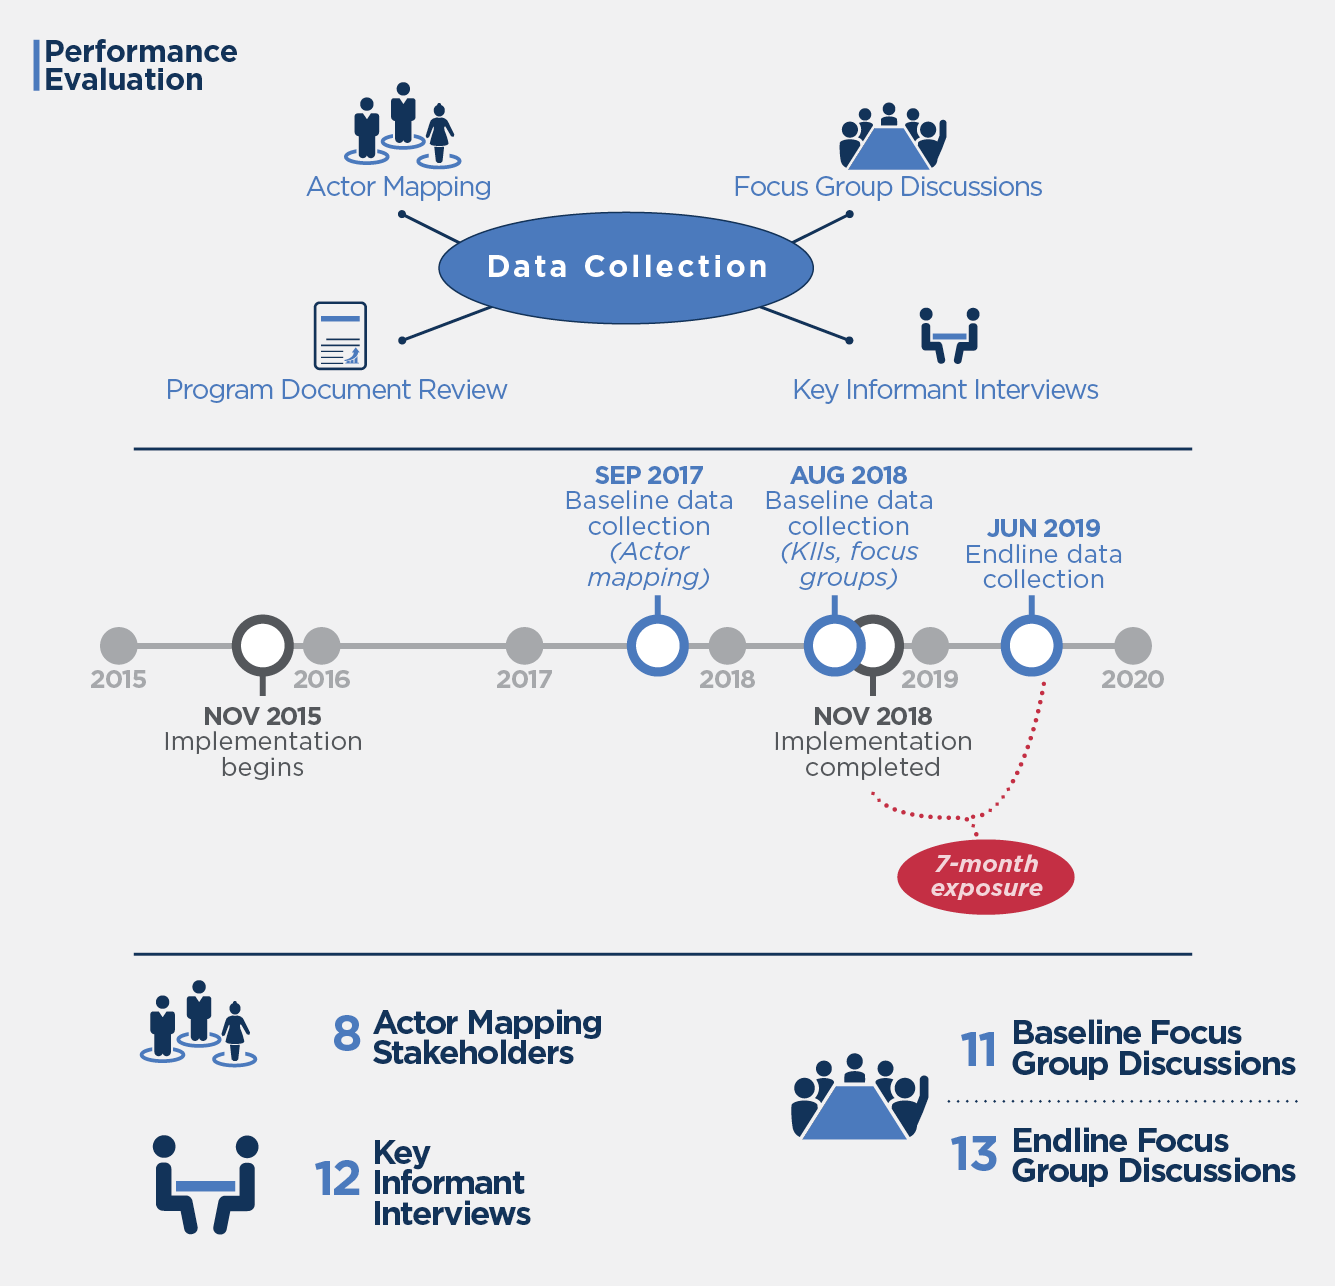 Evaluation methodology and data collection details